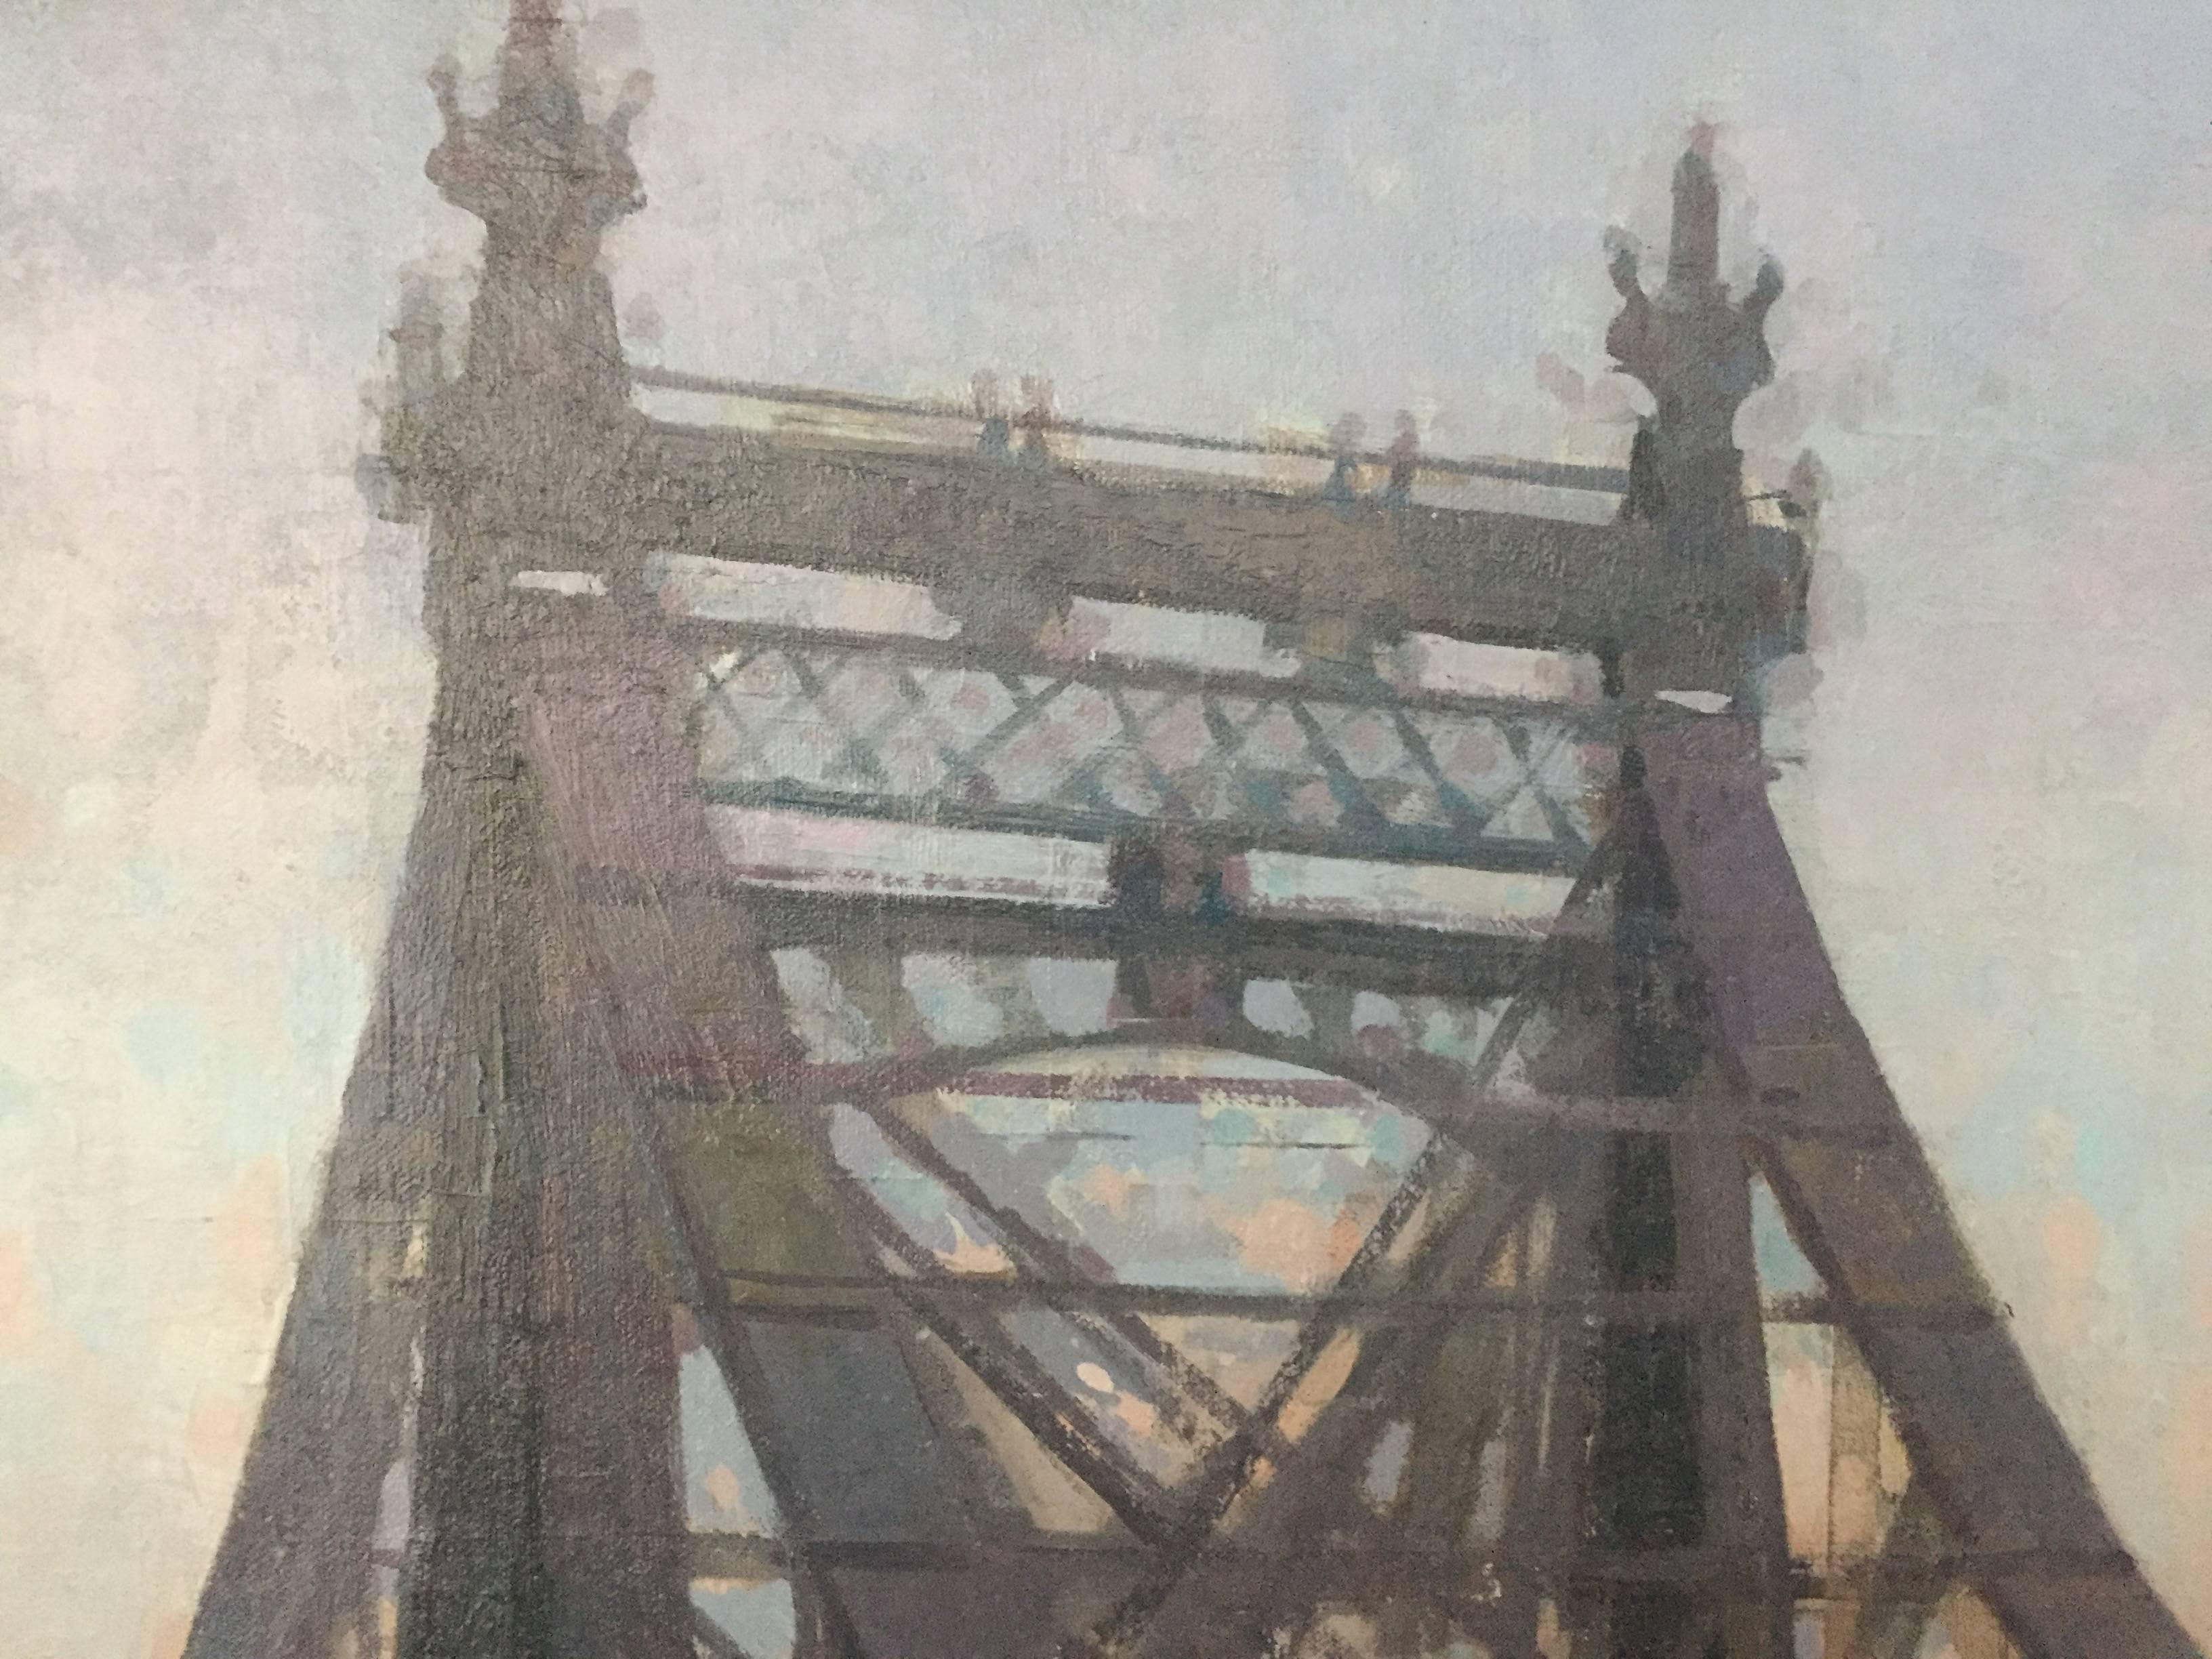 Painted in Collaboration with Steve Forster. Two painters, One canvas.

Signed "Bauman + Forster" lower left corner

The Queensboro Bridge, also known as the 59th Street Bridge is a cantilever bridge over the East River in New York City. A